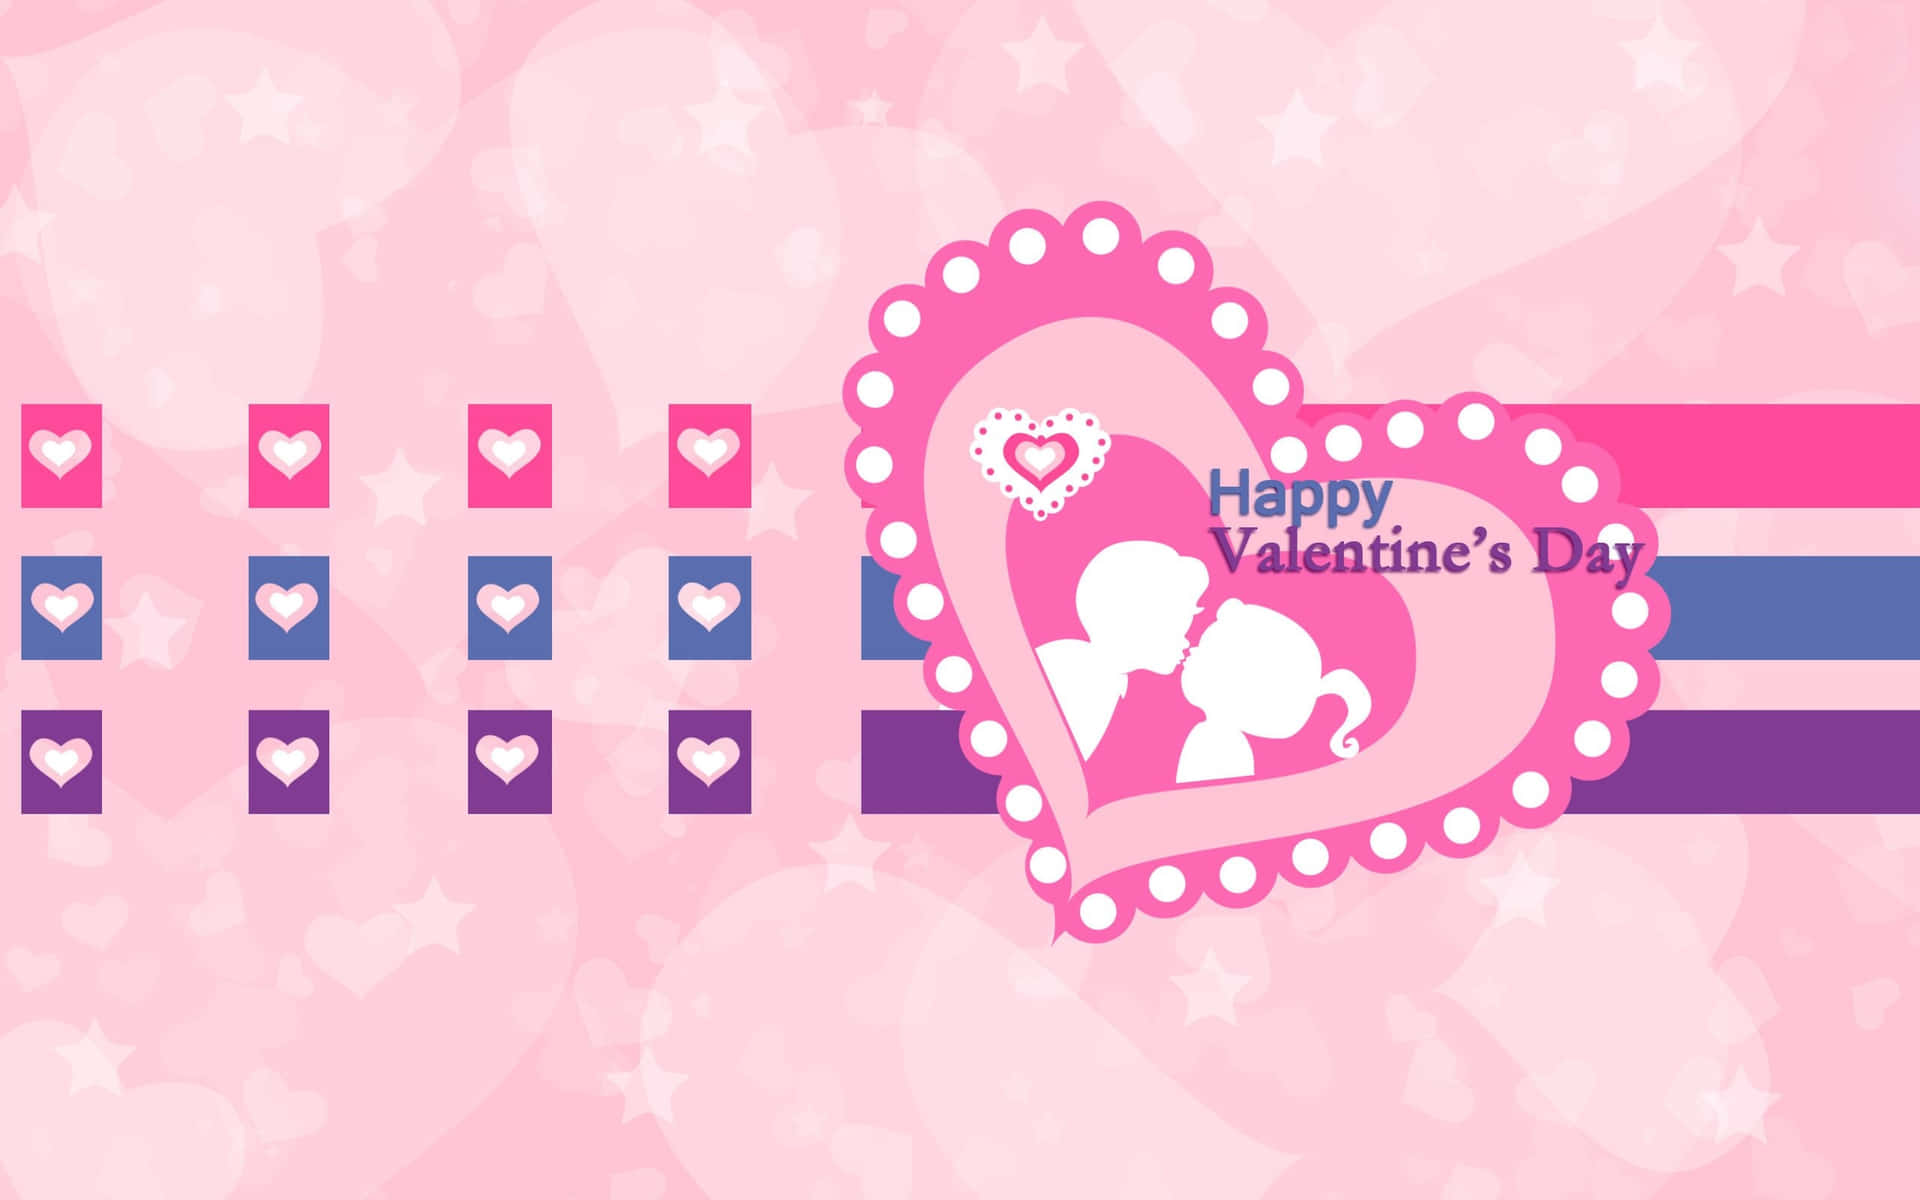 Happy Valentine's Day Wallpapers Background